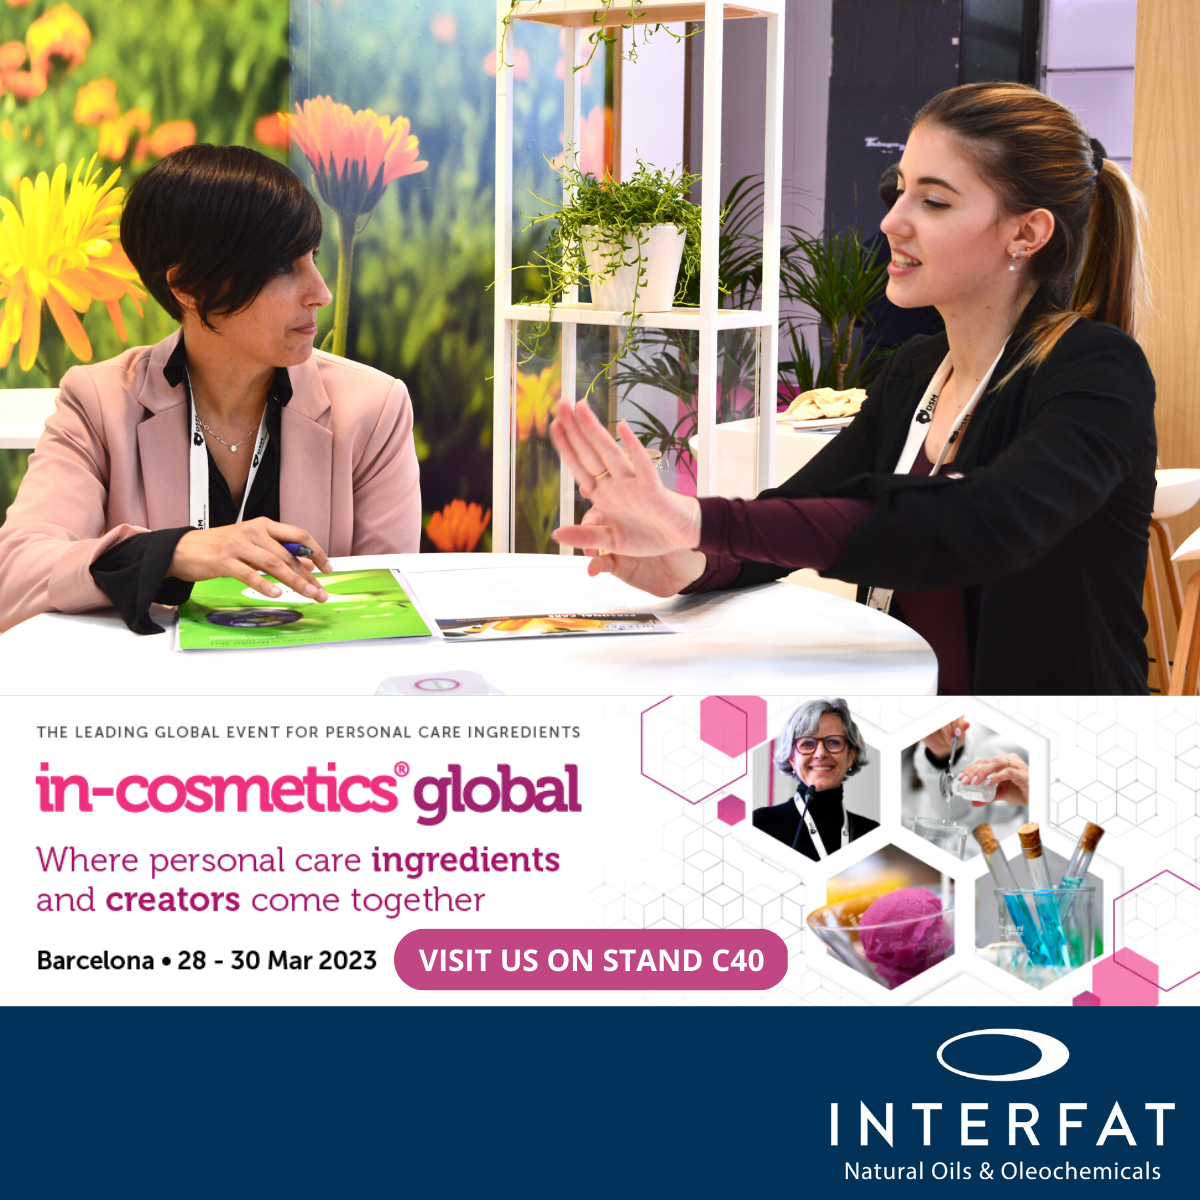 Interfat | Specialists in natural oils and derivatives